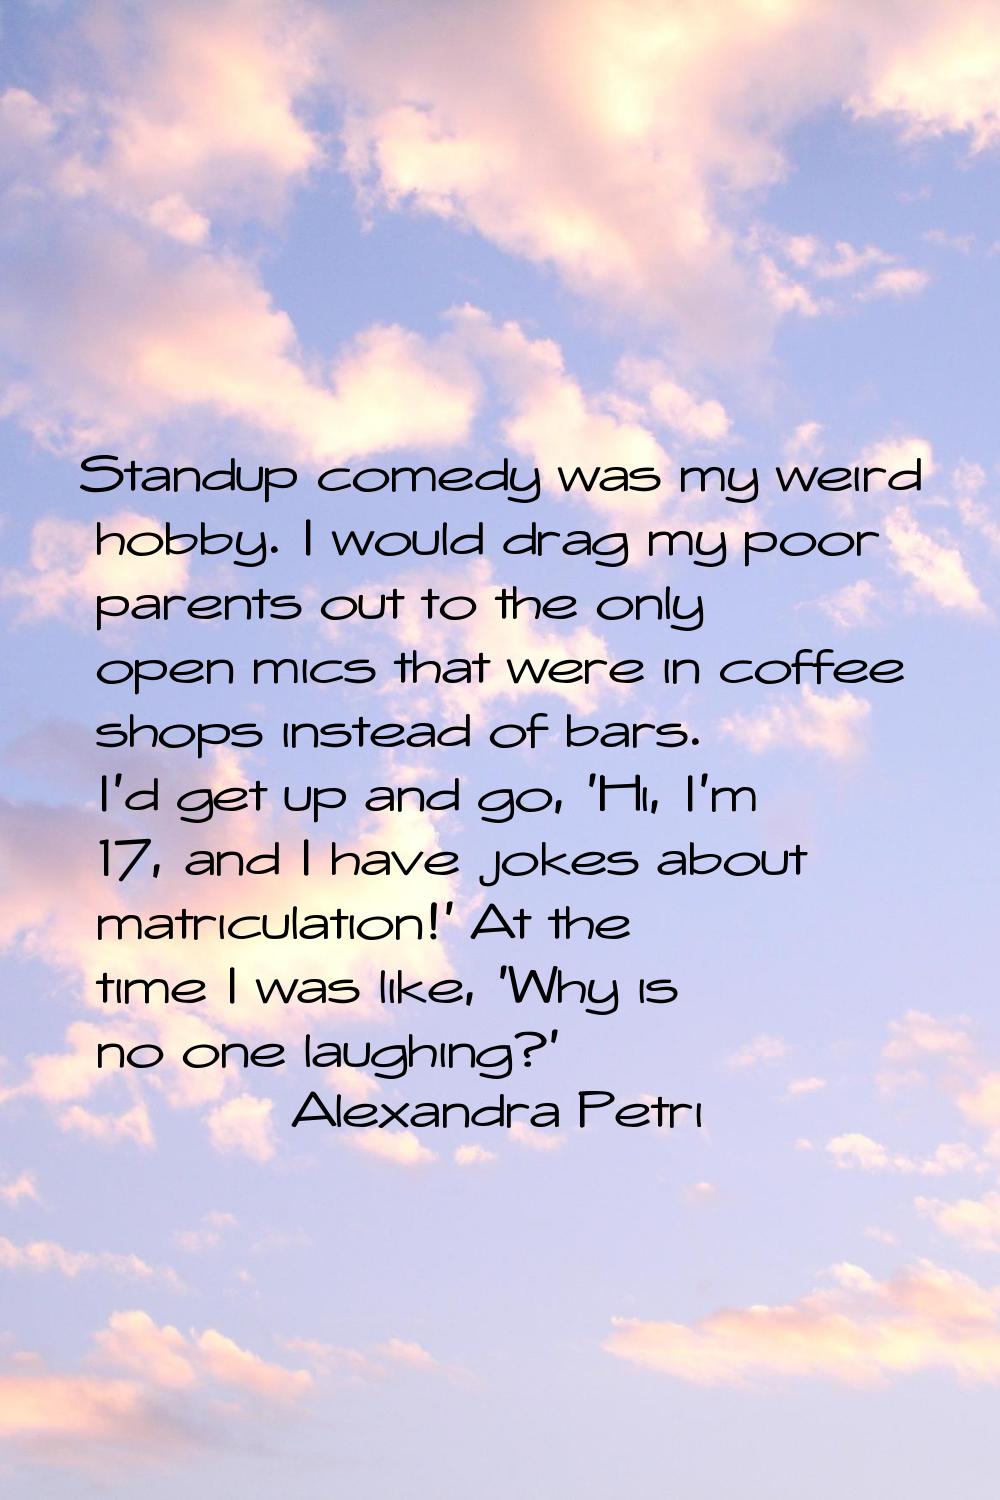 Standup comedy was my weird hobby. I would drag my poor parents out to the only open mics that were